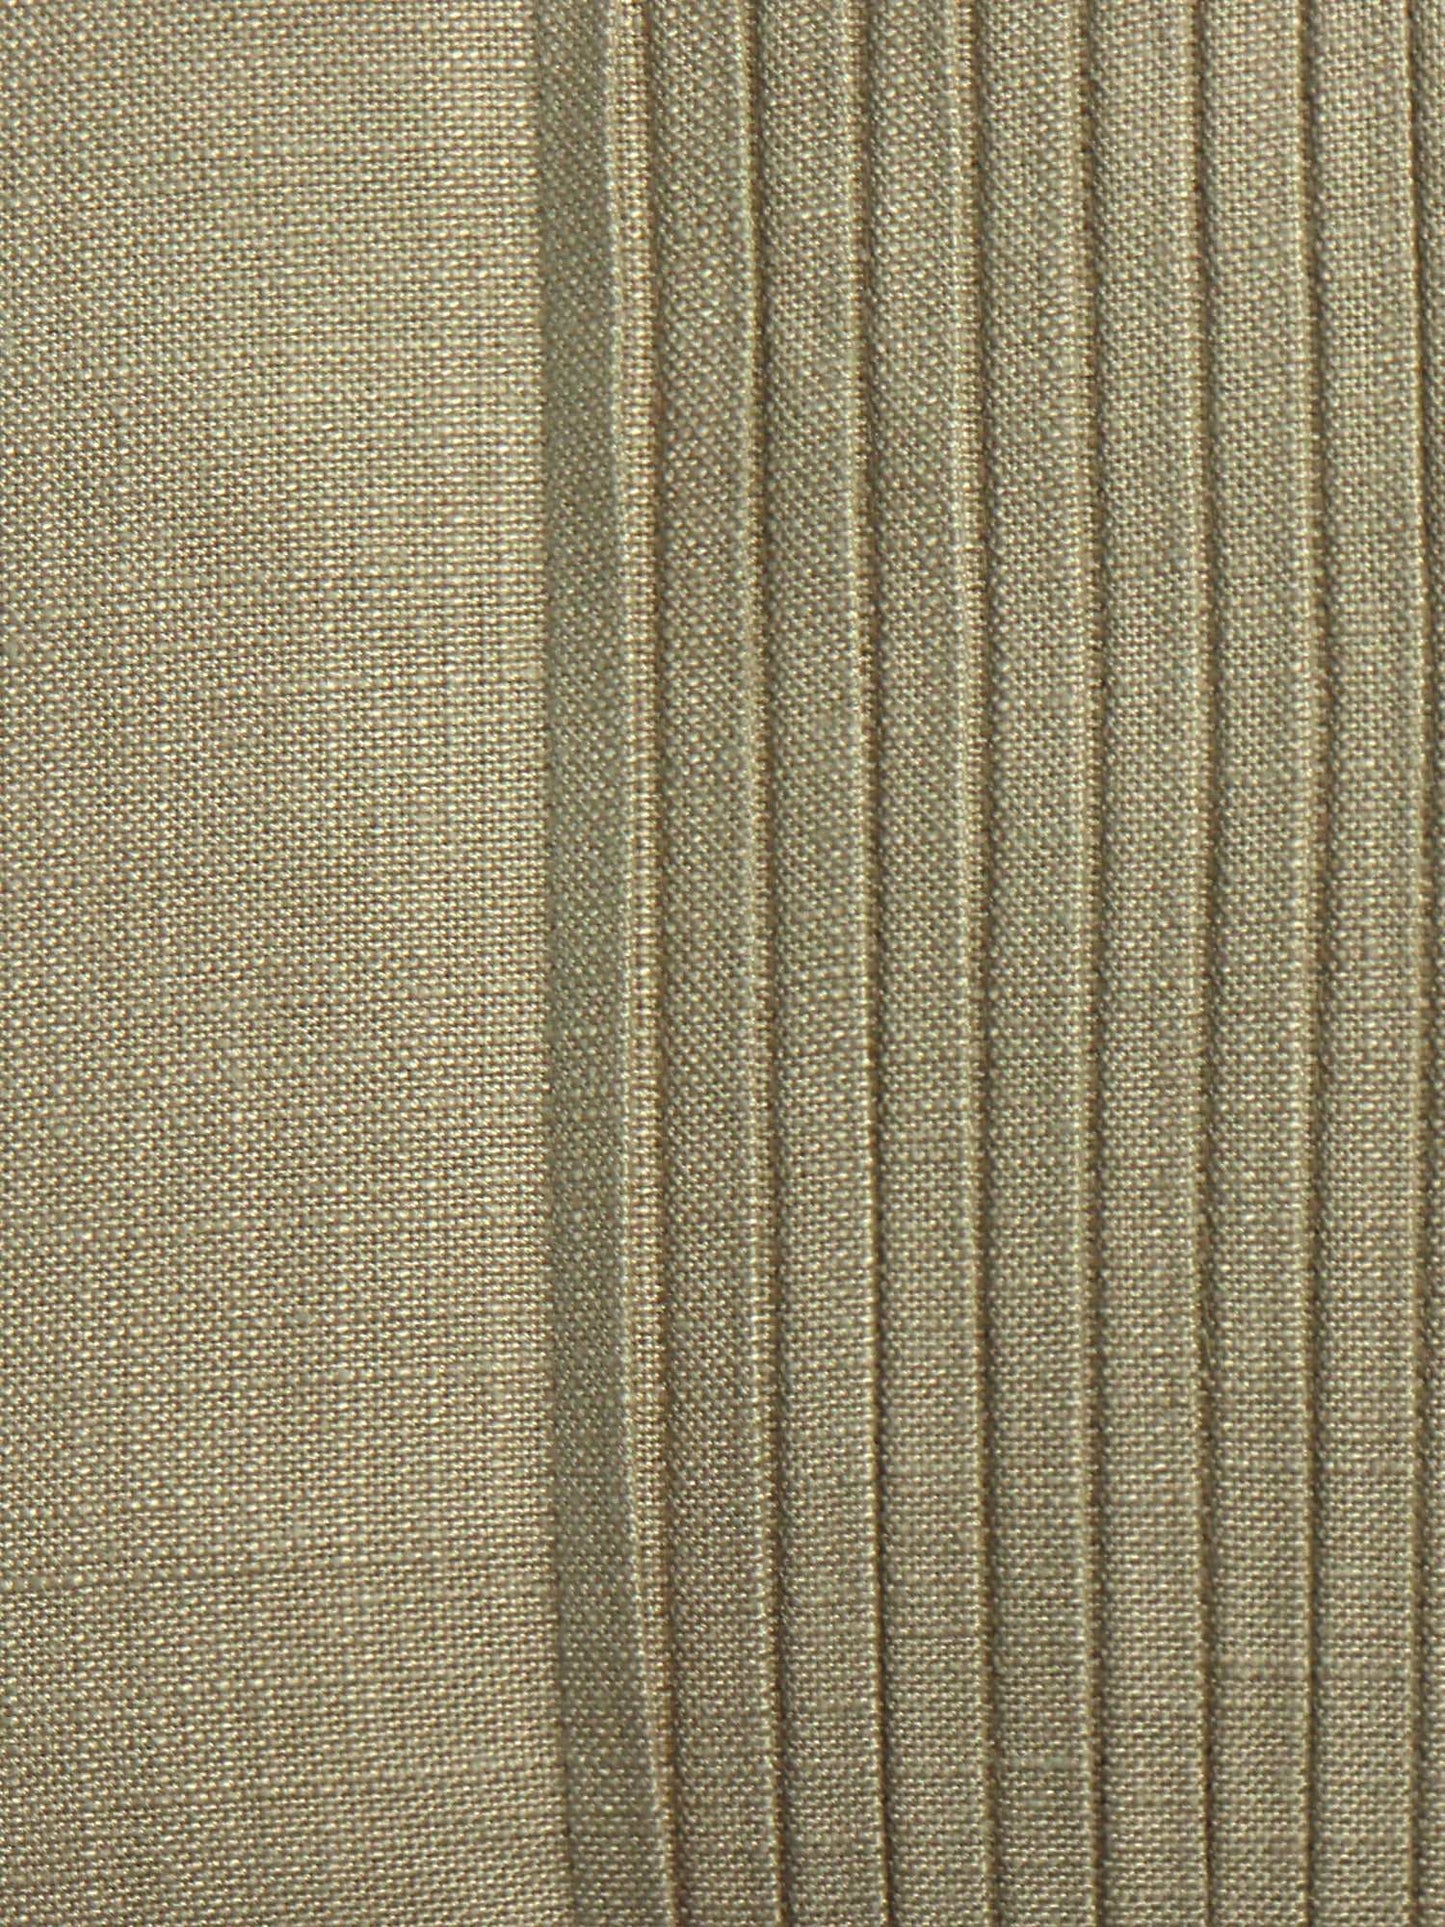 Cushion Cover Cotton Blend Solid Pleats In Center Antique Gold - 16" X 16"